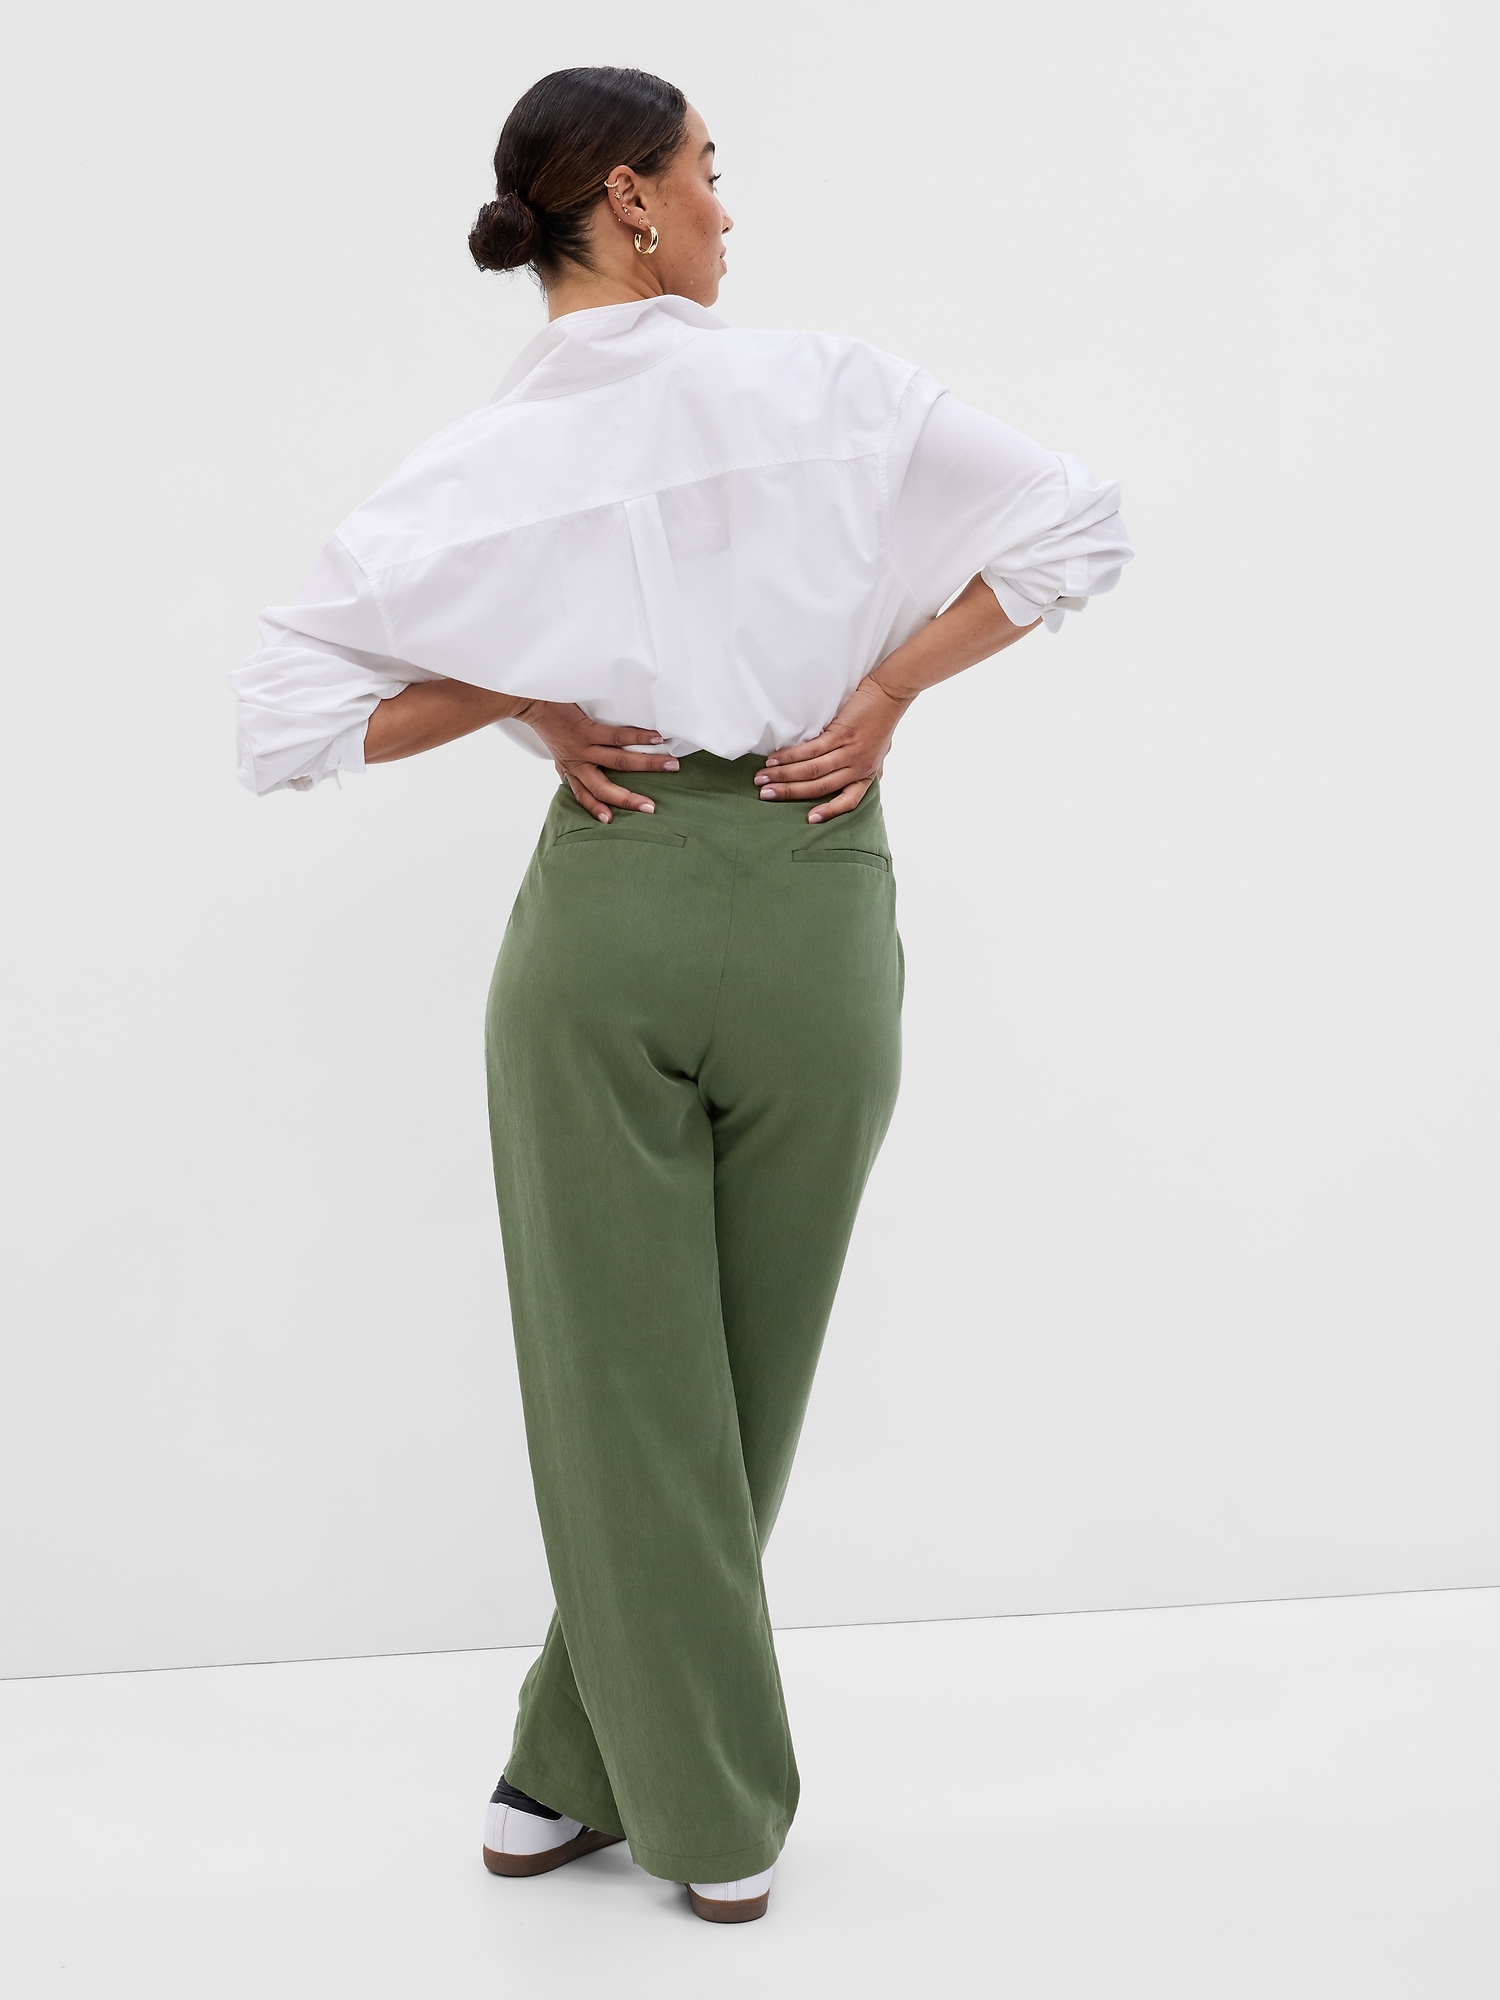 SoftSuit Trousers | Gap